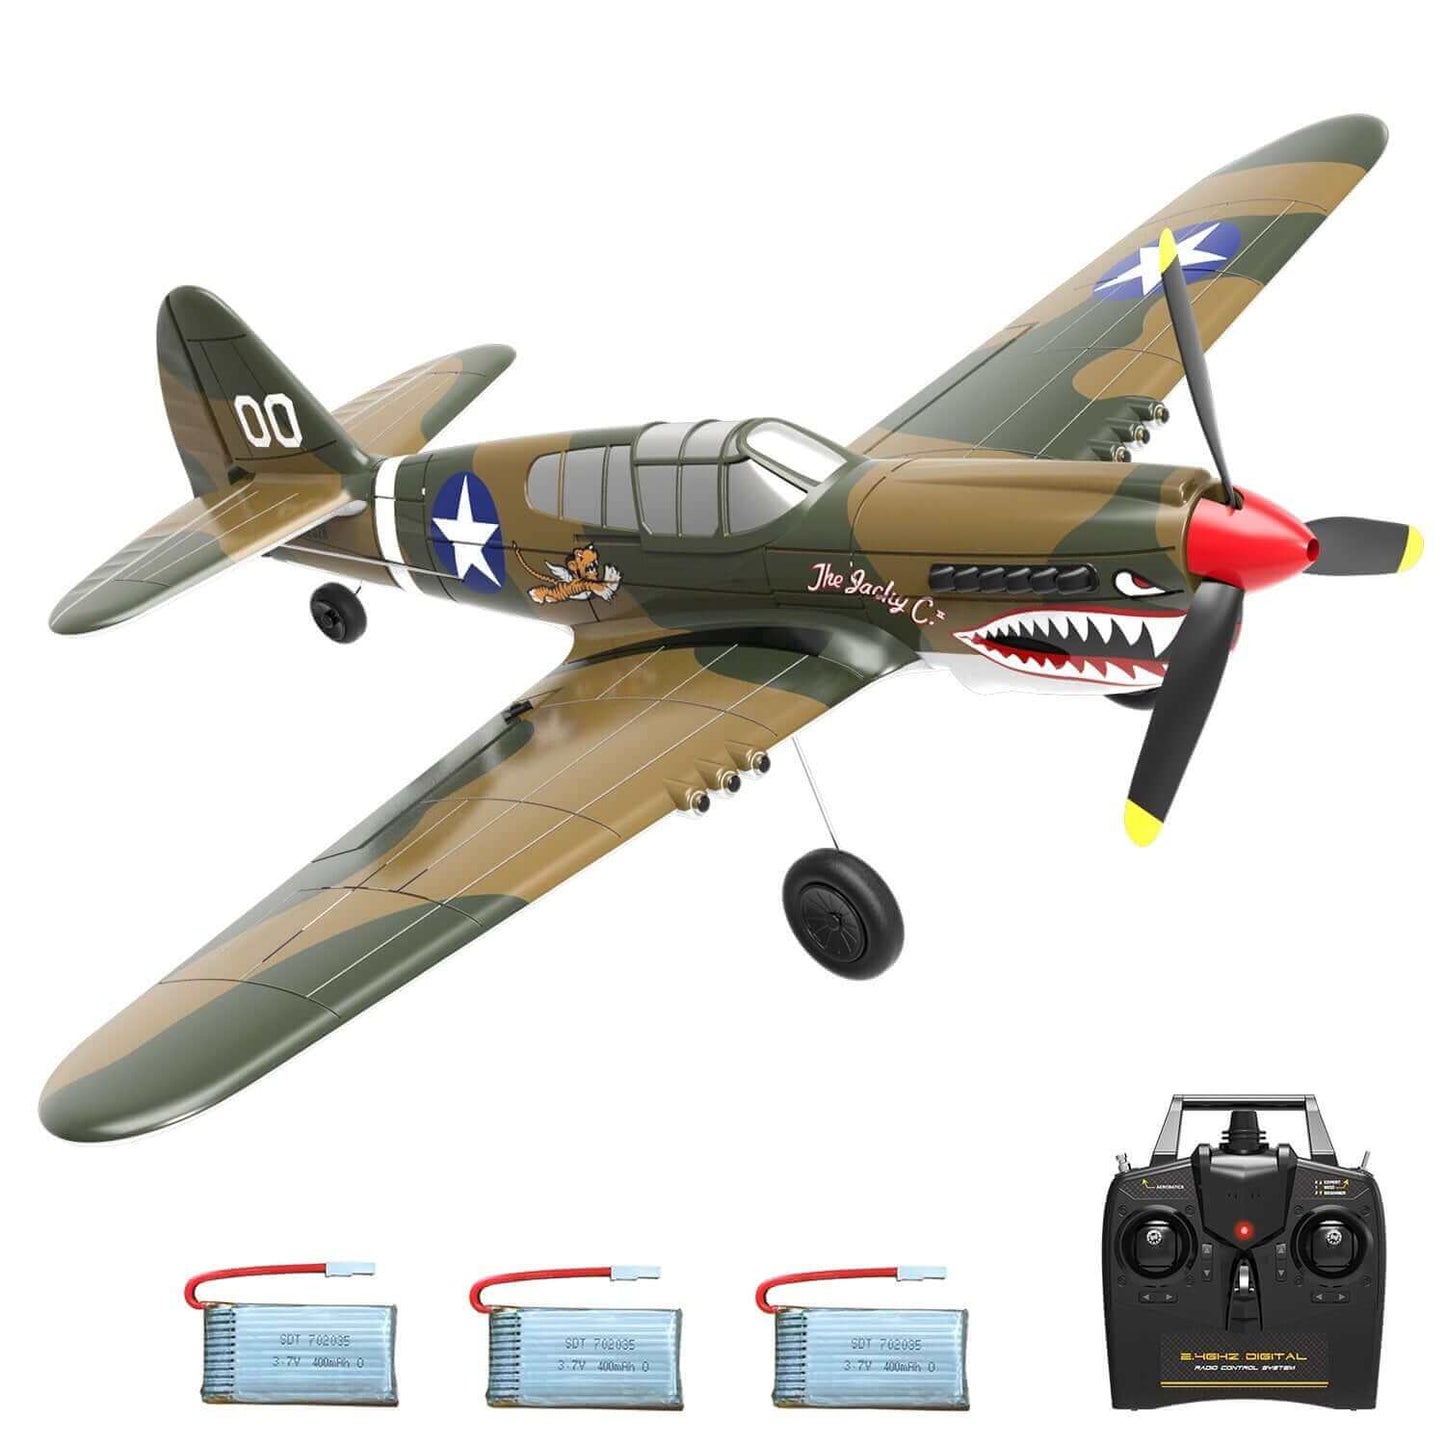  P-40 Warbird RC Fighter: Aerobatic Fun with 400mm Wingspan & 4CH Control | Kids toy lover